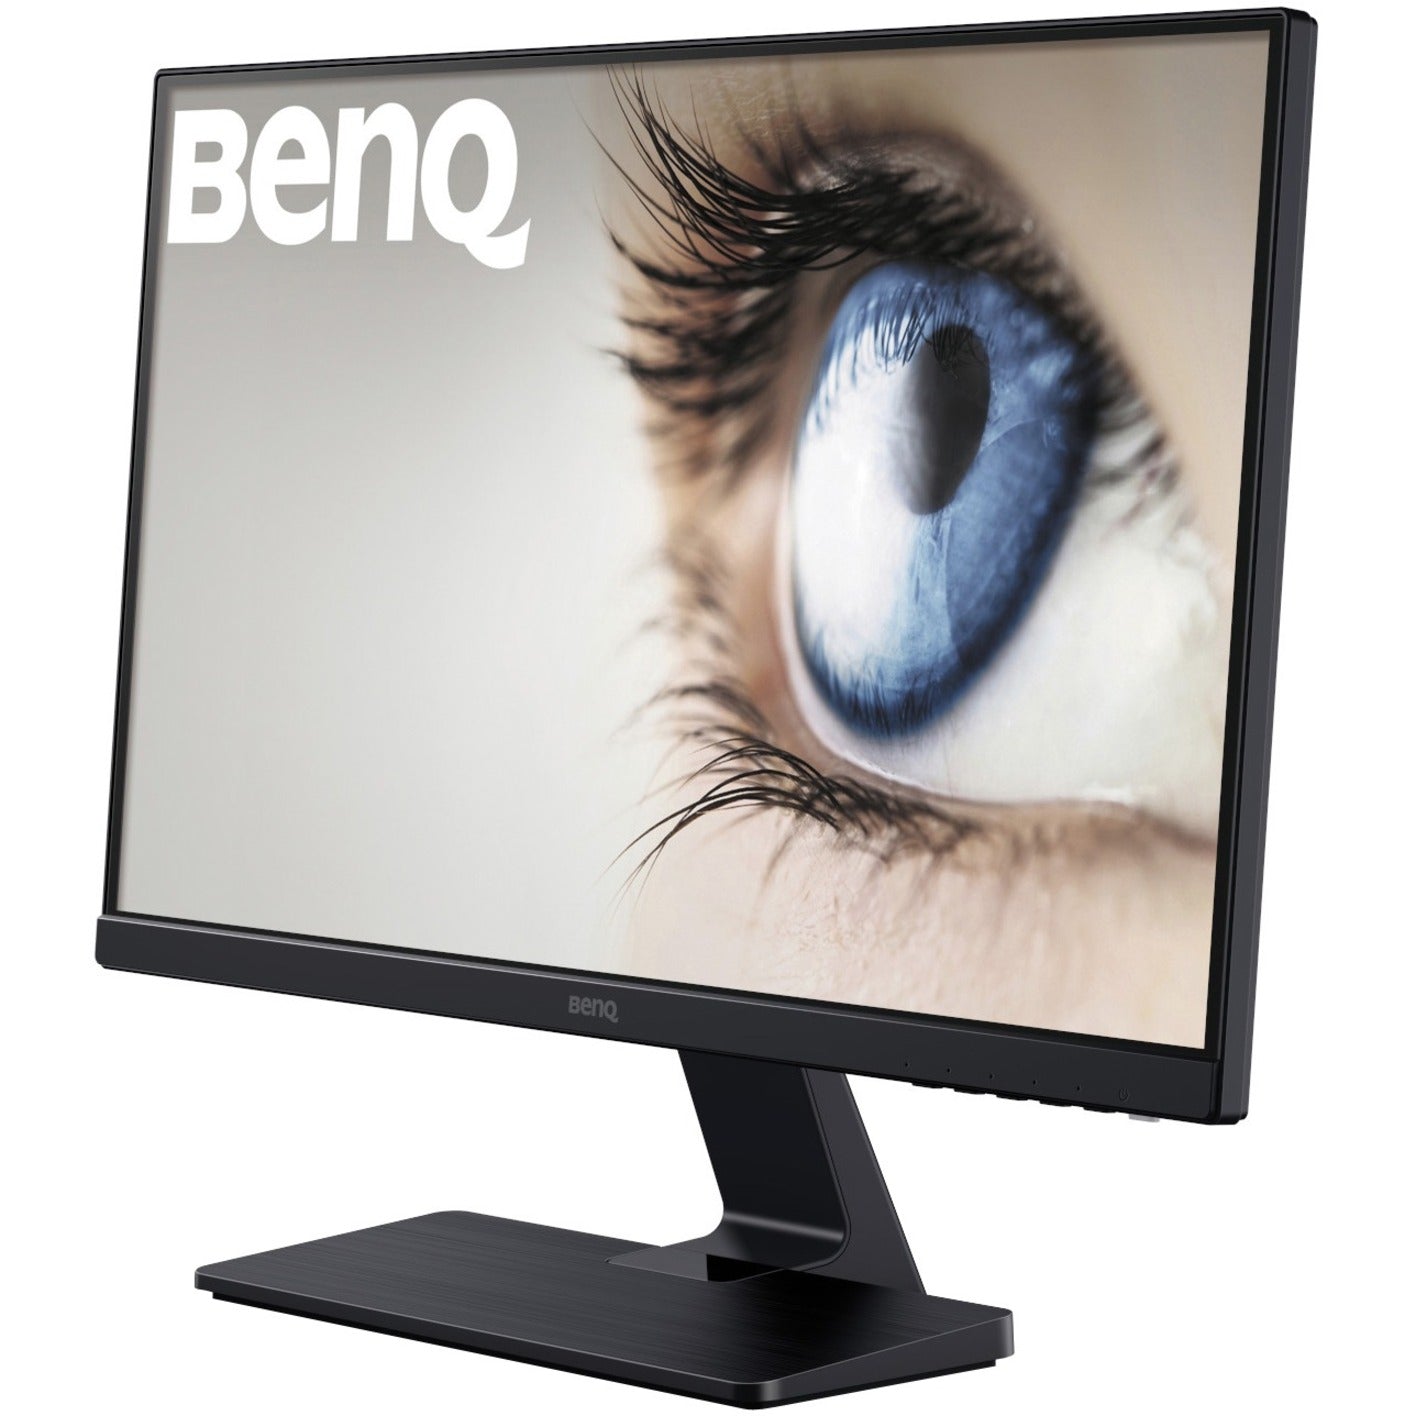 BenQ GW2475H 23.8 Full HD LCD Monitor - Stylish Monitor with Eye-care Technology, FHD, HDMI [Discontinued]